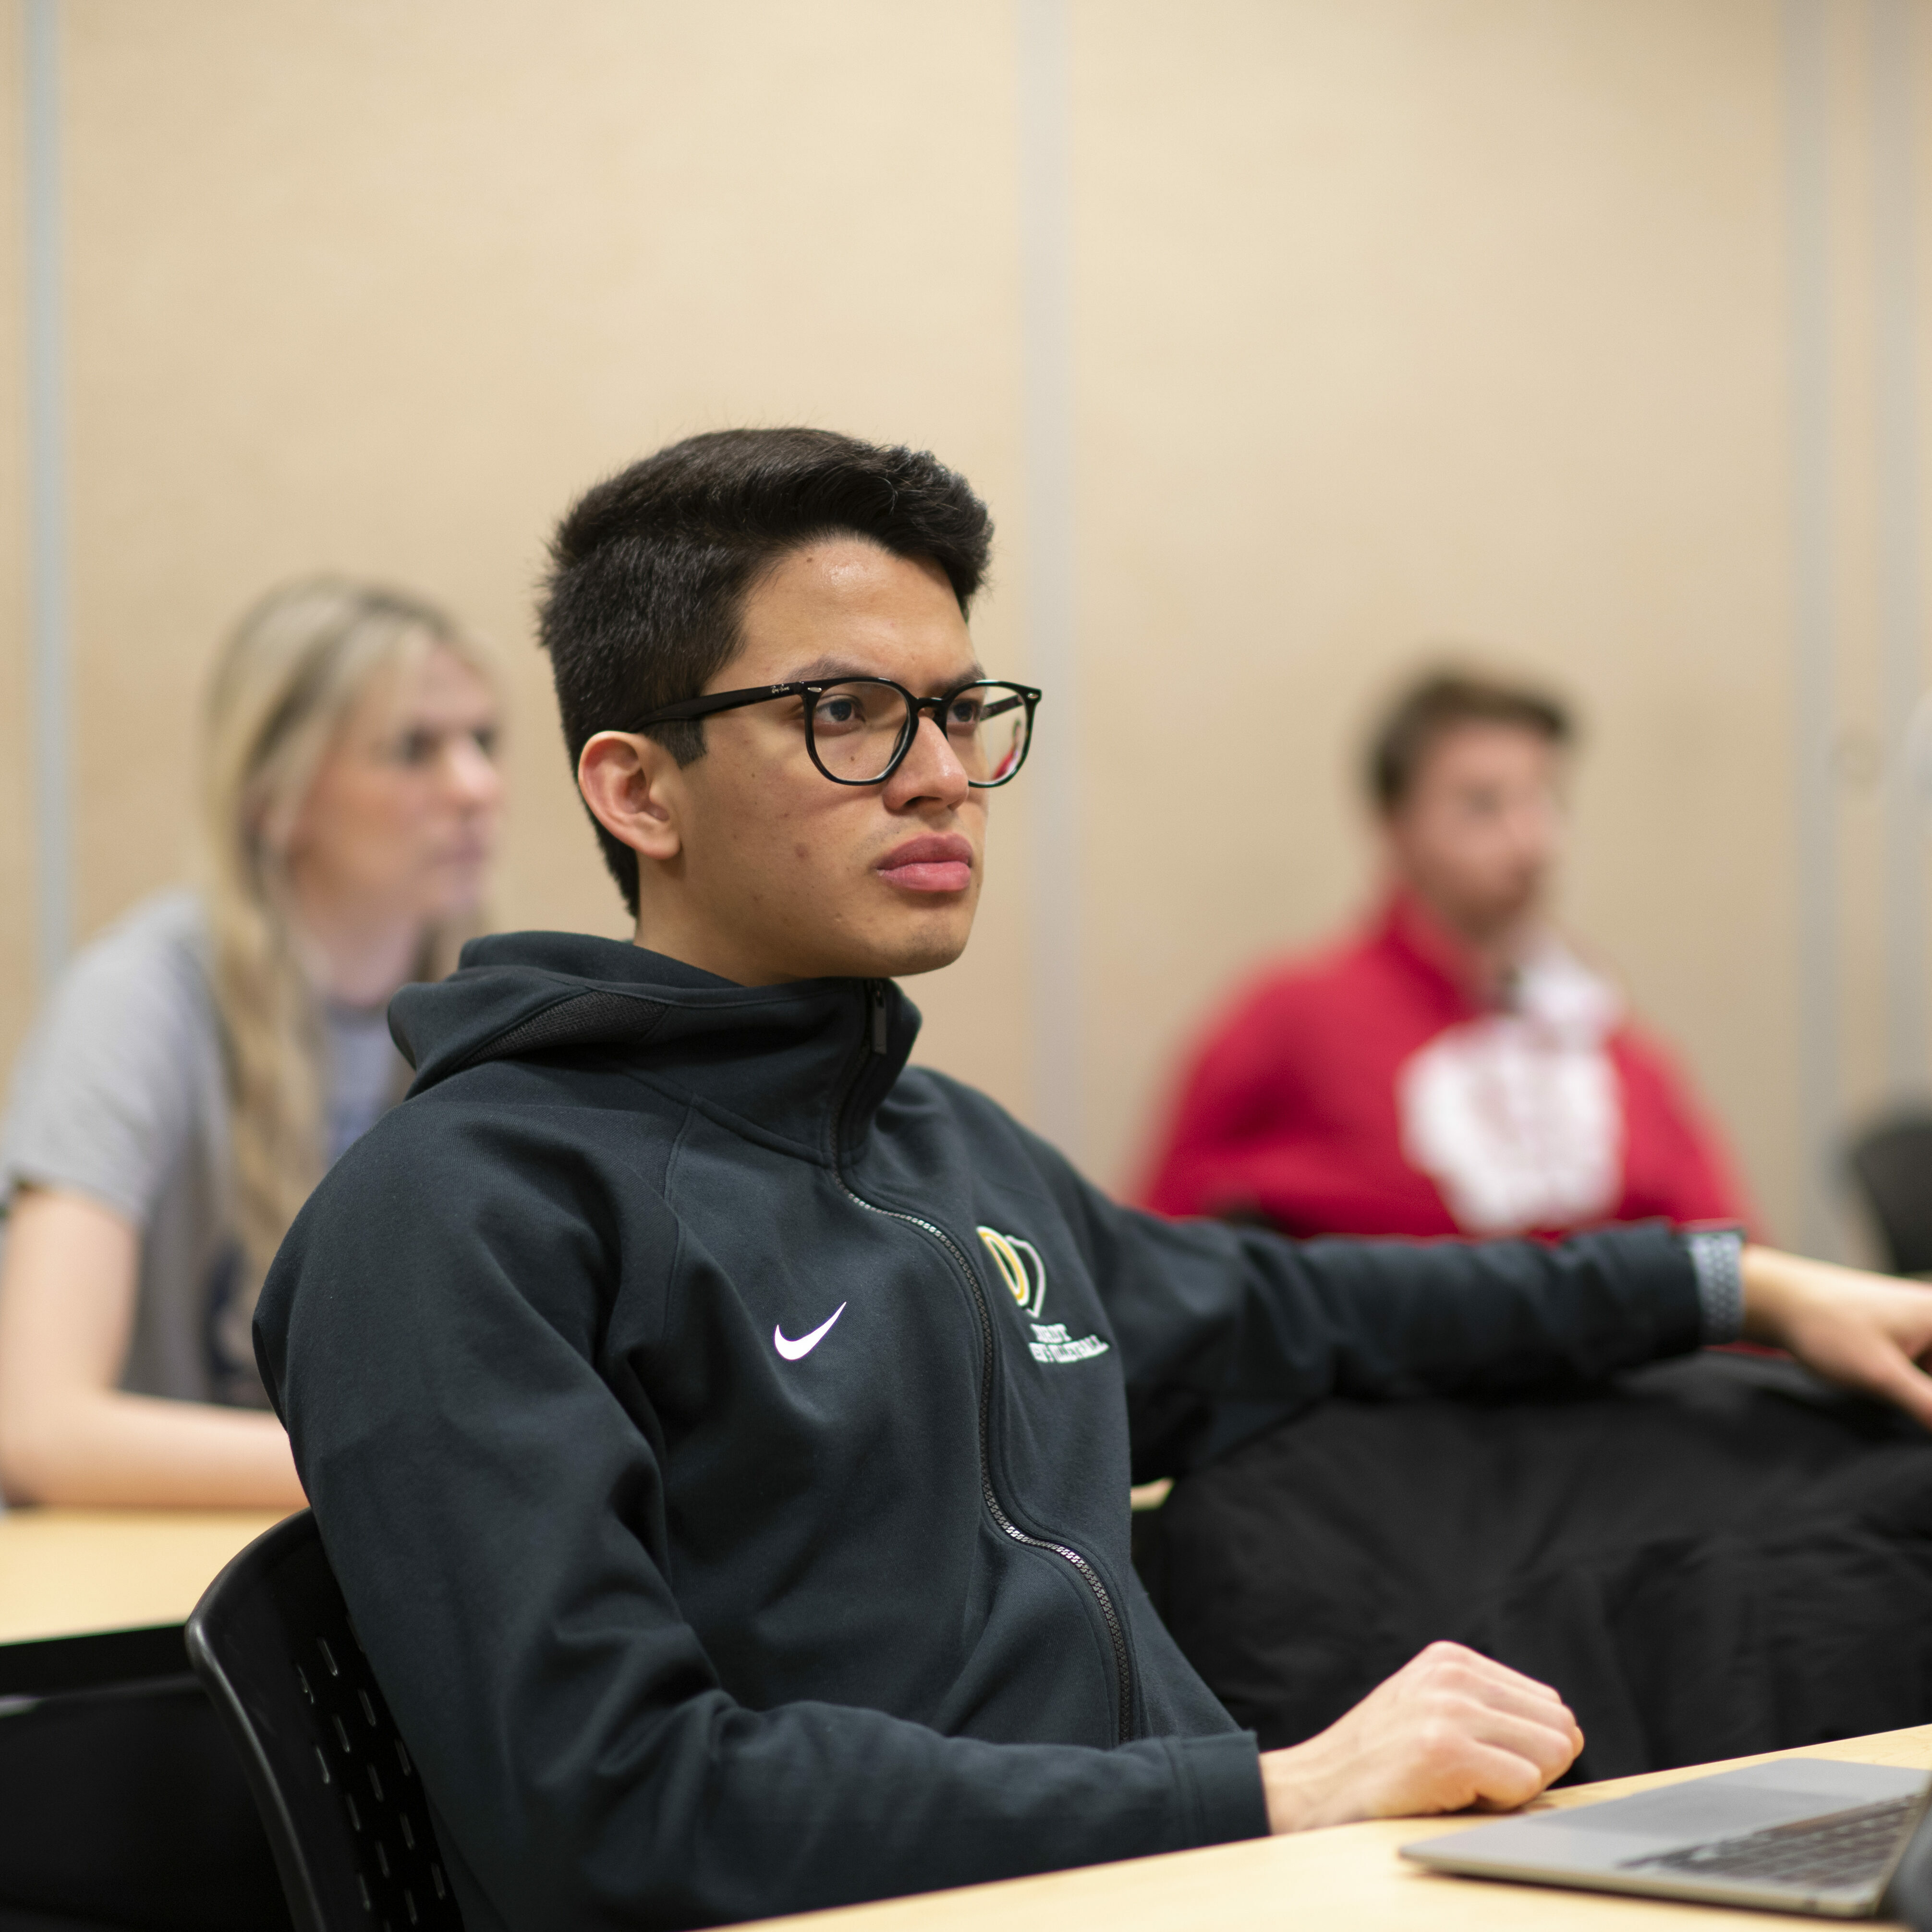 Male student sits in class and listens